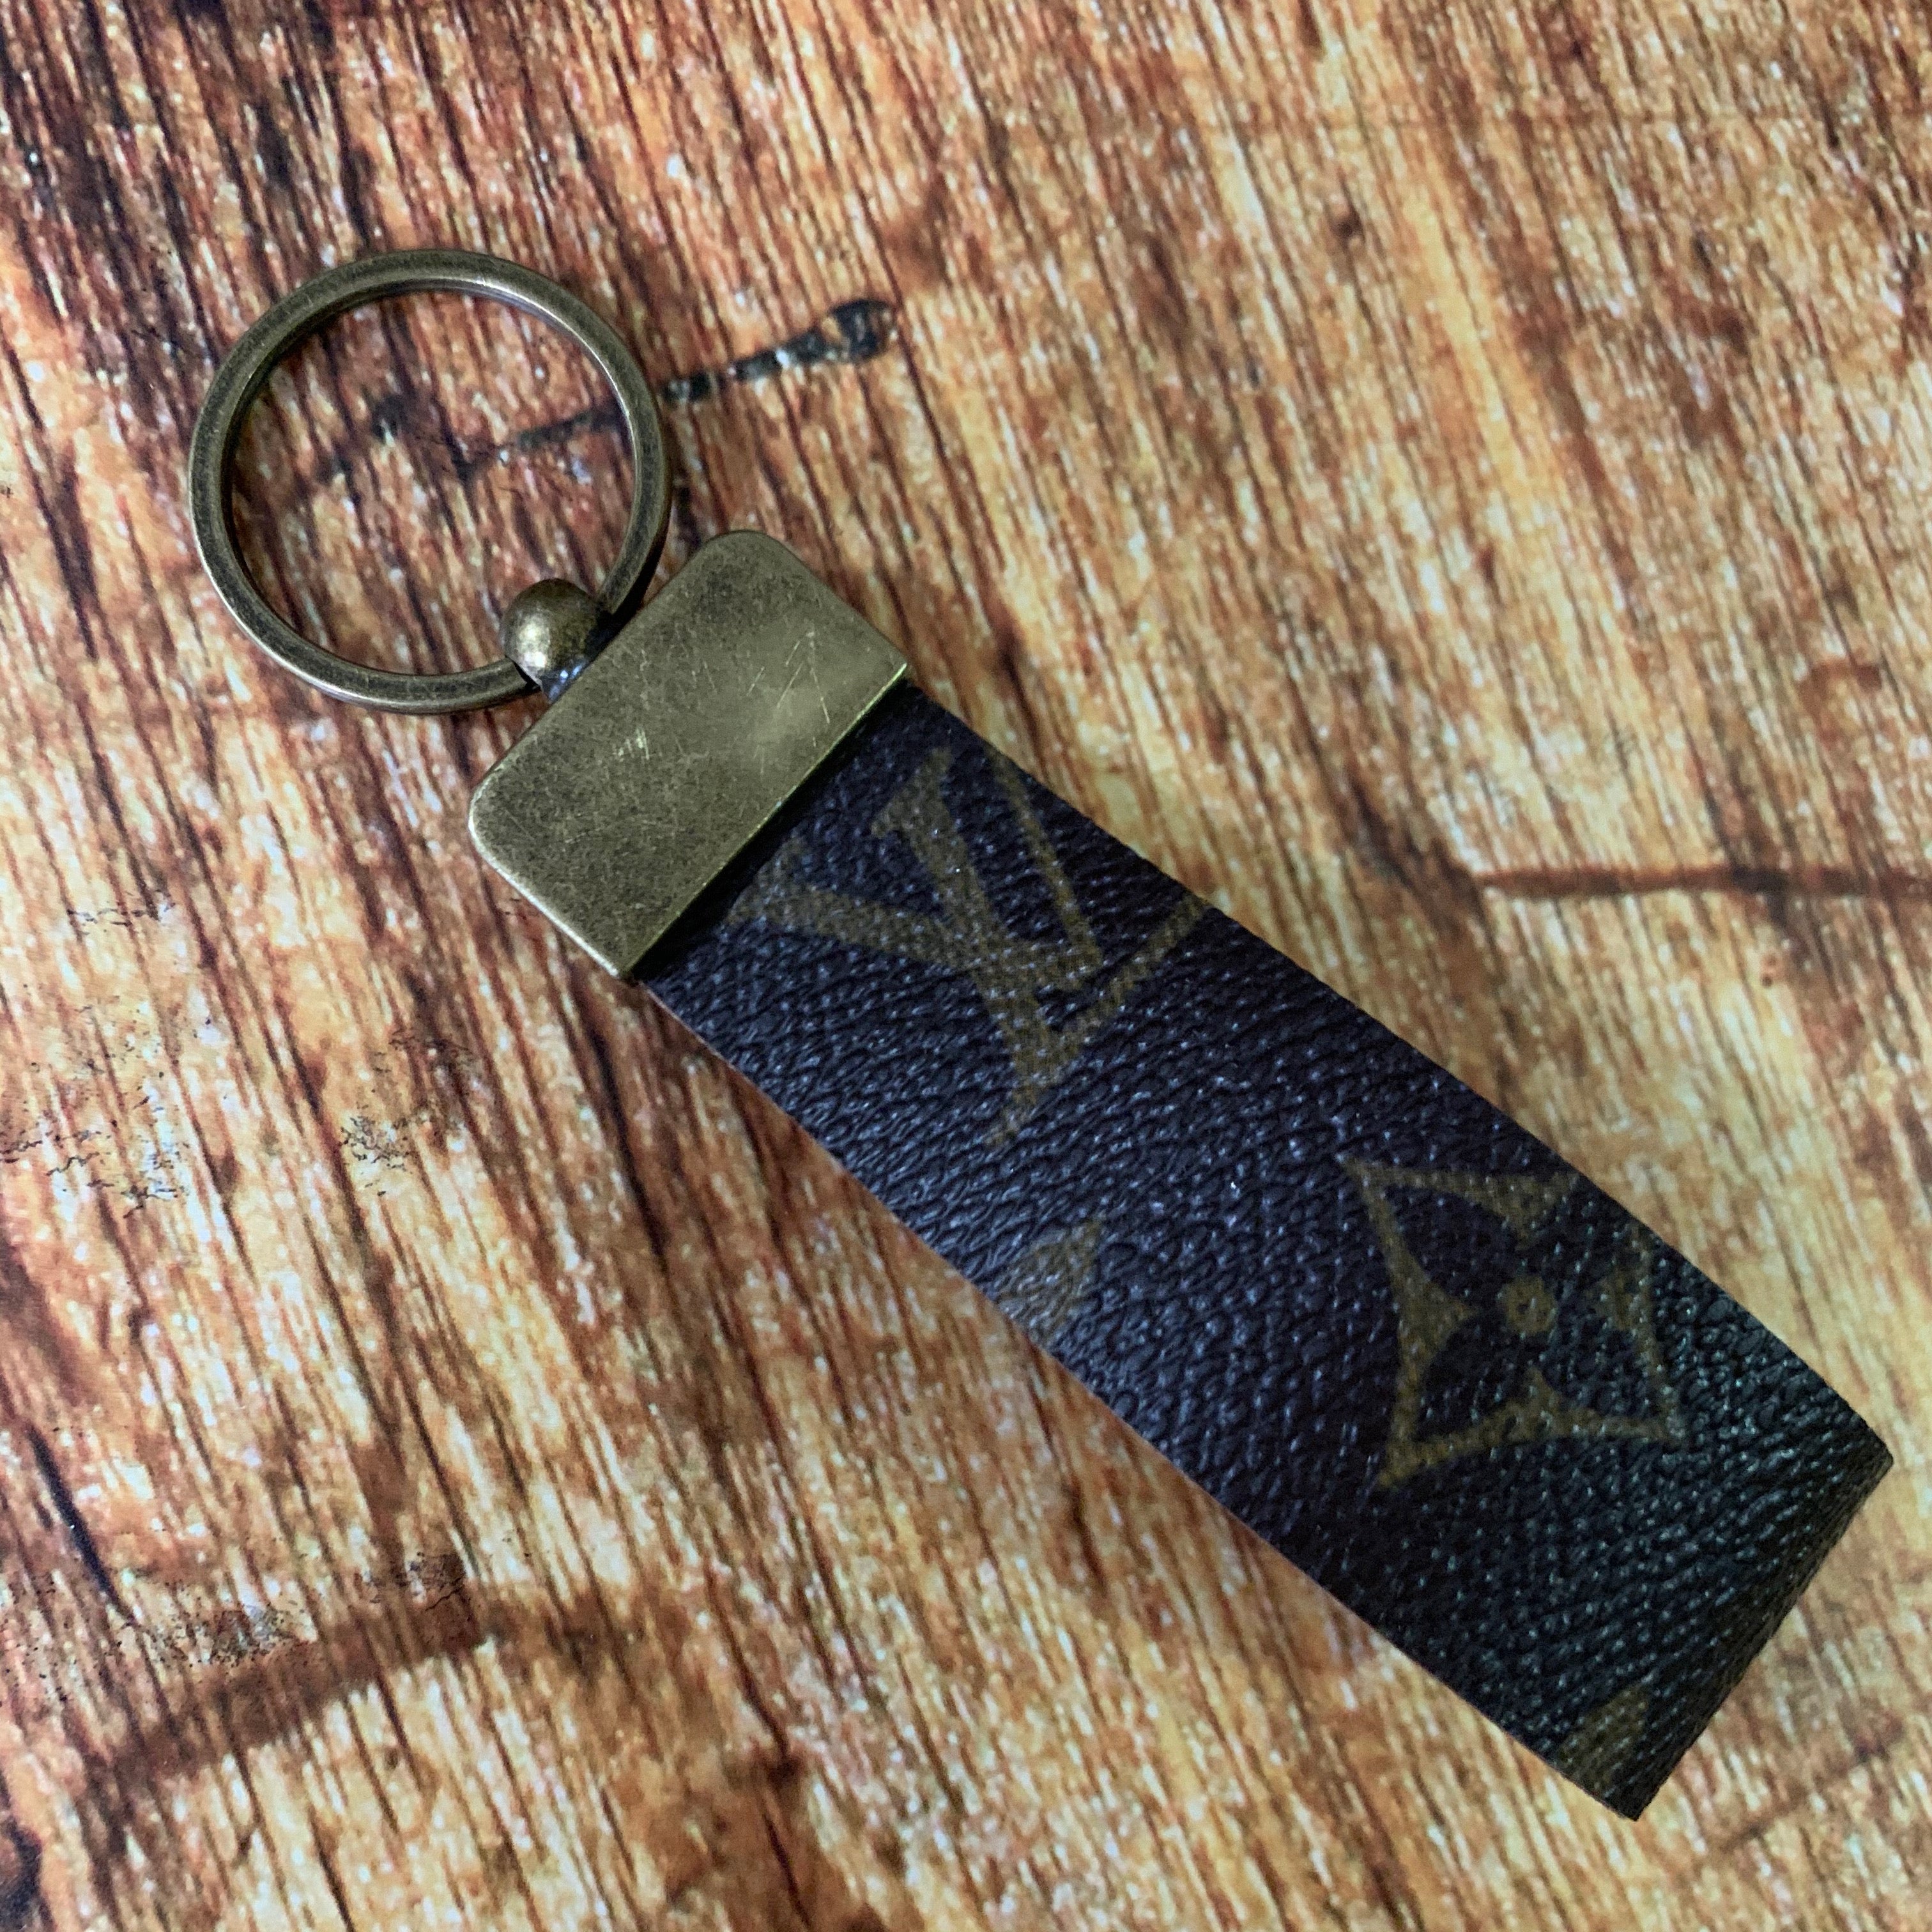 Repurposed Louis Vuitton Leather Key Chain